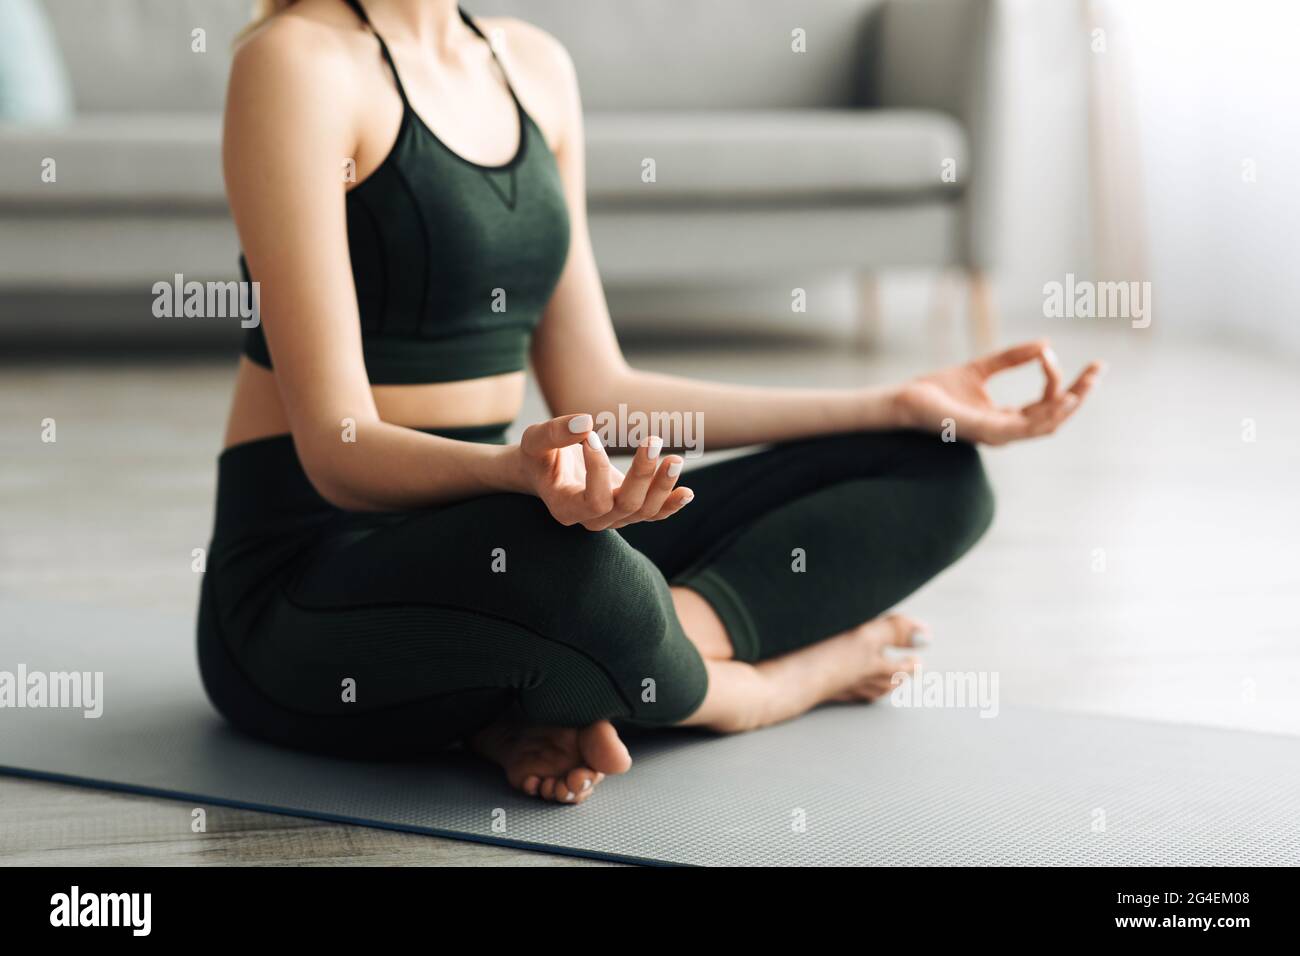 Meditation, free time, health care, rest and relaxation. No stress, freedom, breathing exercises Stock Photo